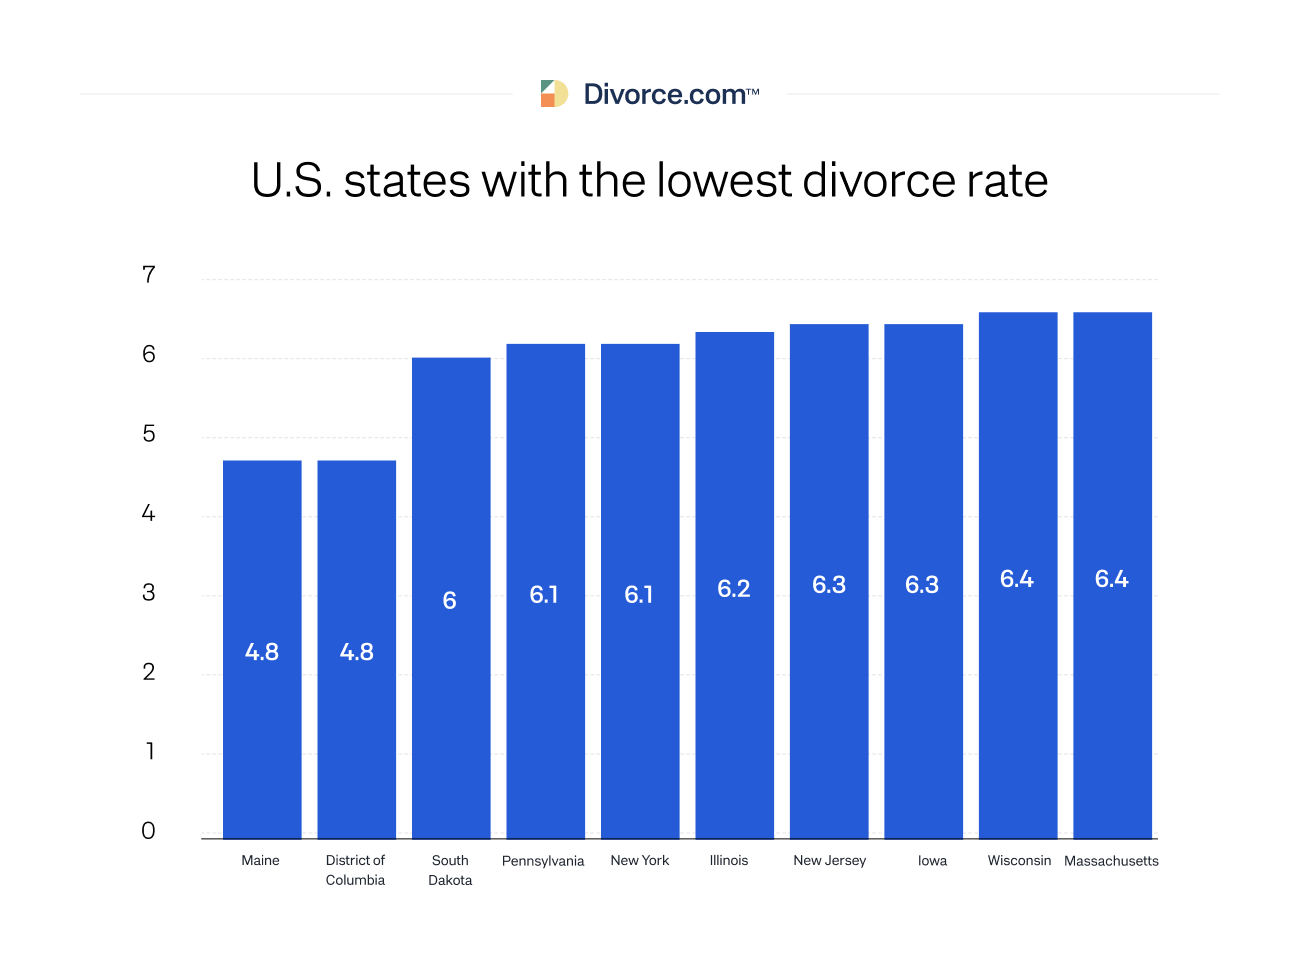 U.S. states with the lowest divorce rate